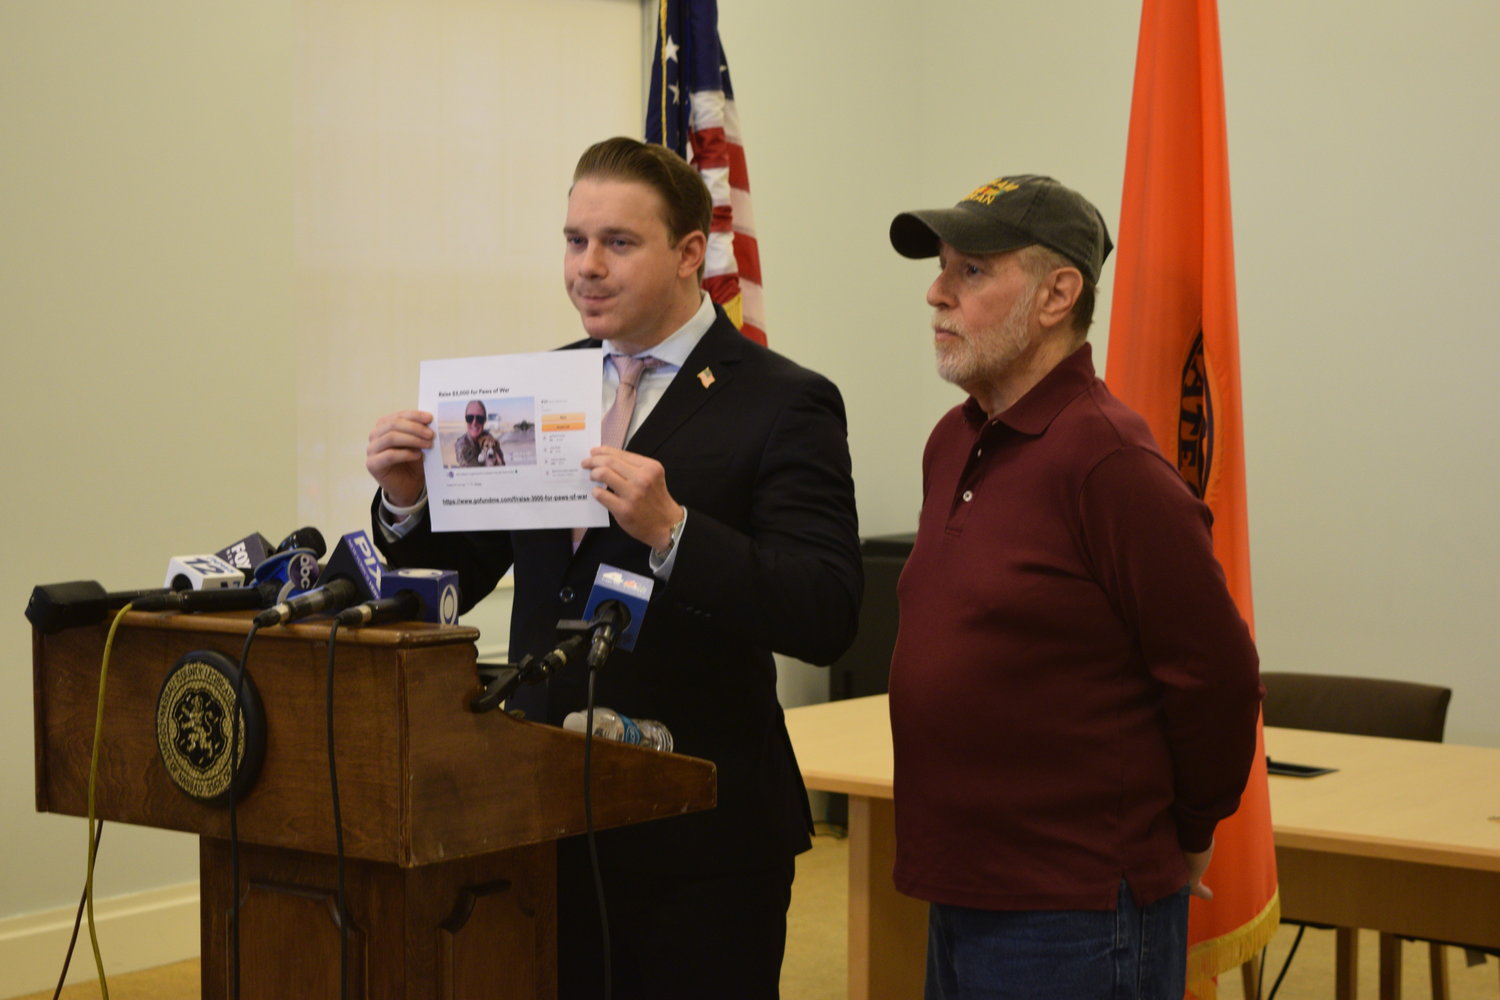 Nassau County Legislator Josh Lafazan explained that he had started a GoFundMe page to raise $3,000, the exact amount Santos is alleged to have stolen from Osthoff, for the animal protection and service dog training organization Paws of War.